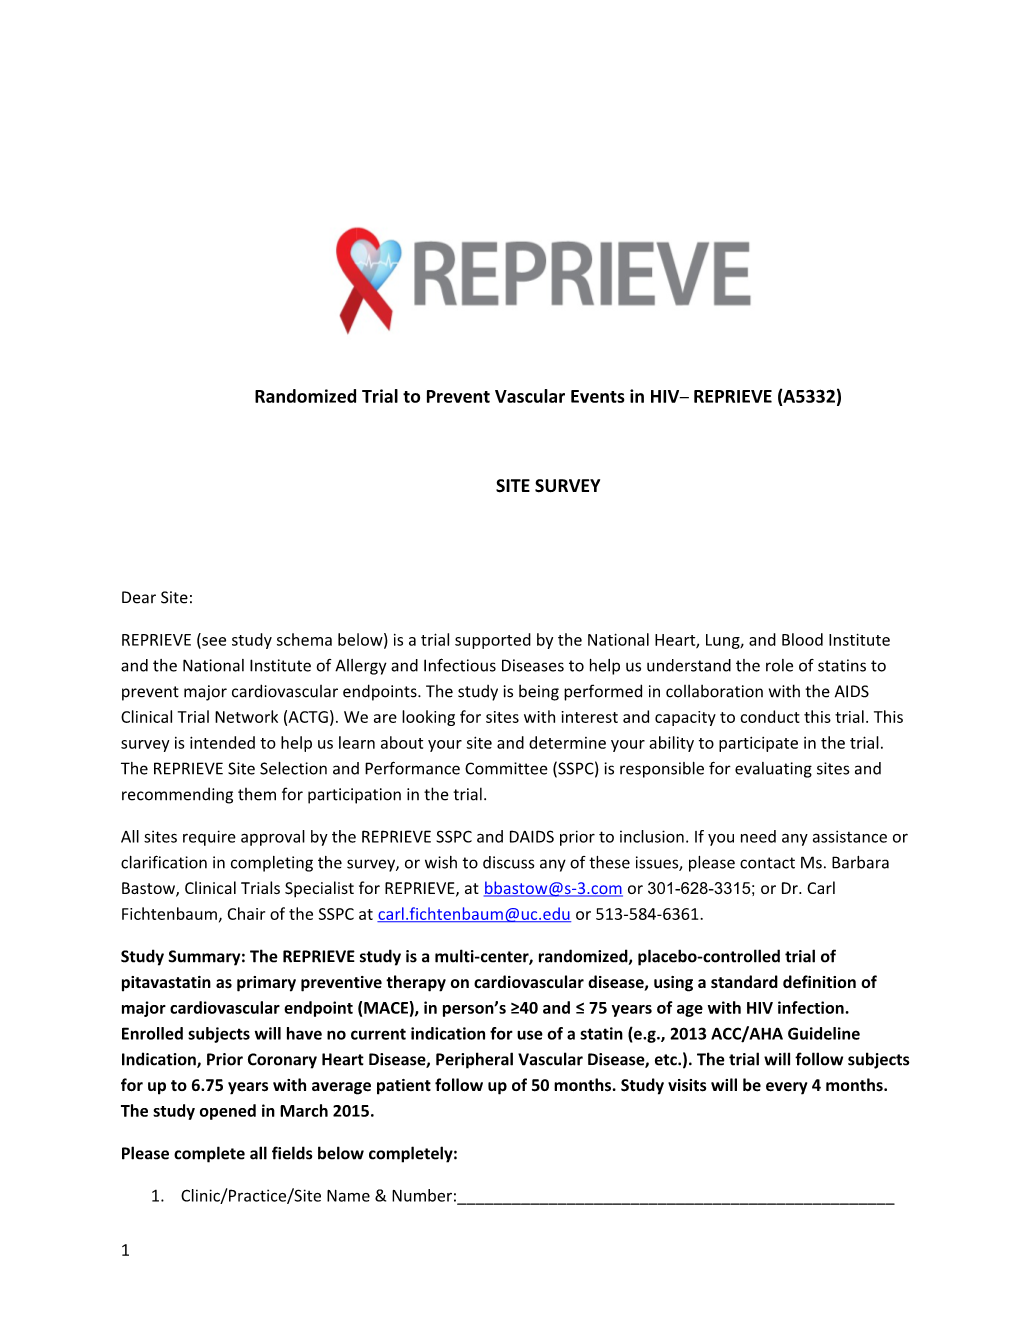 Randomized Trial to Prevent Vascular Events in HIV REPRIEVE (A5332)